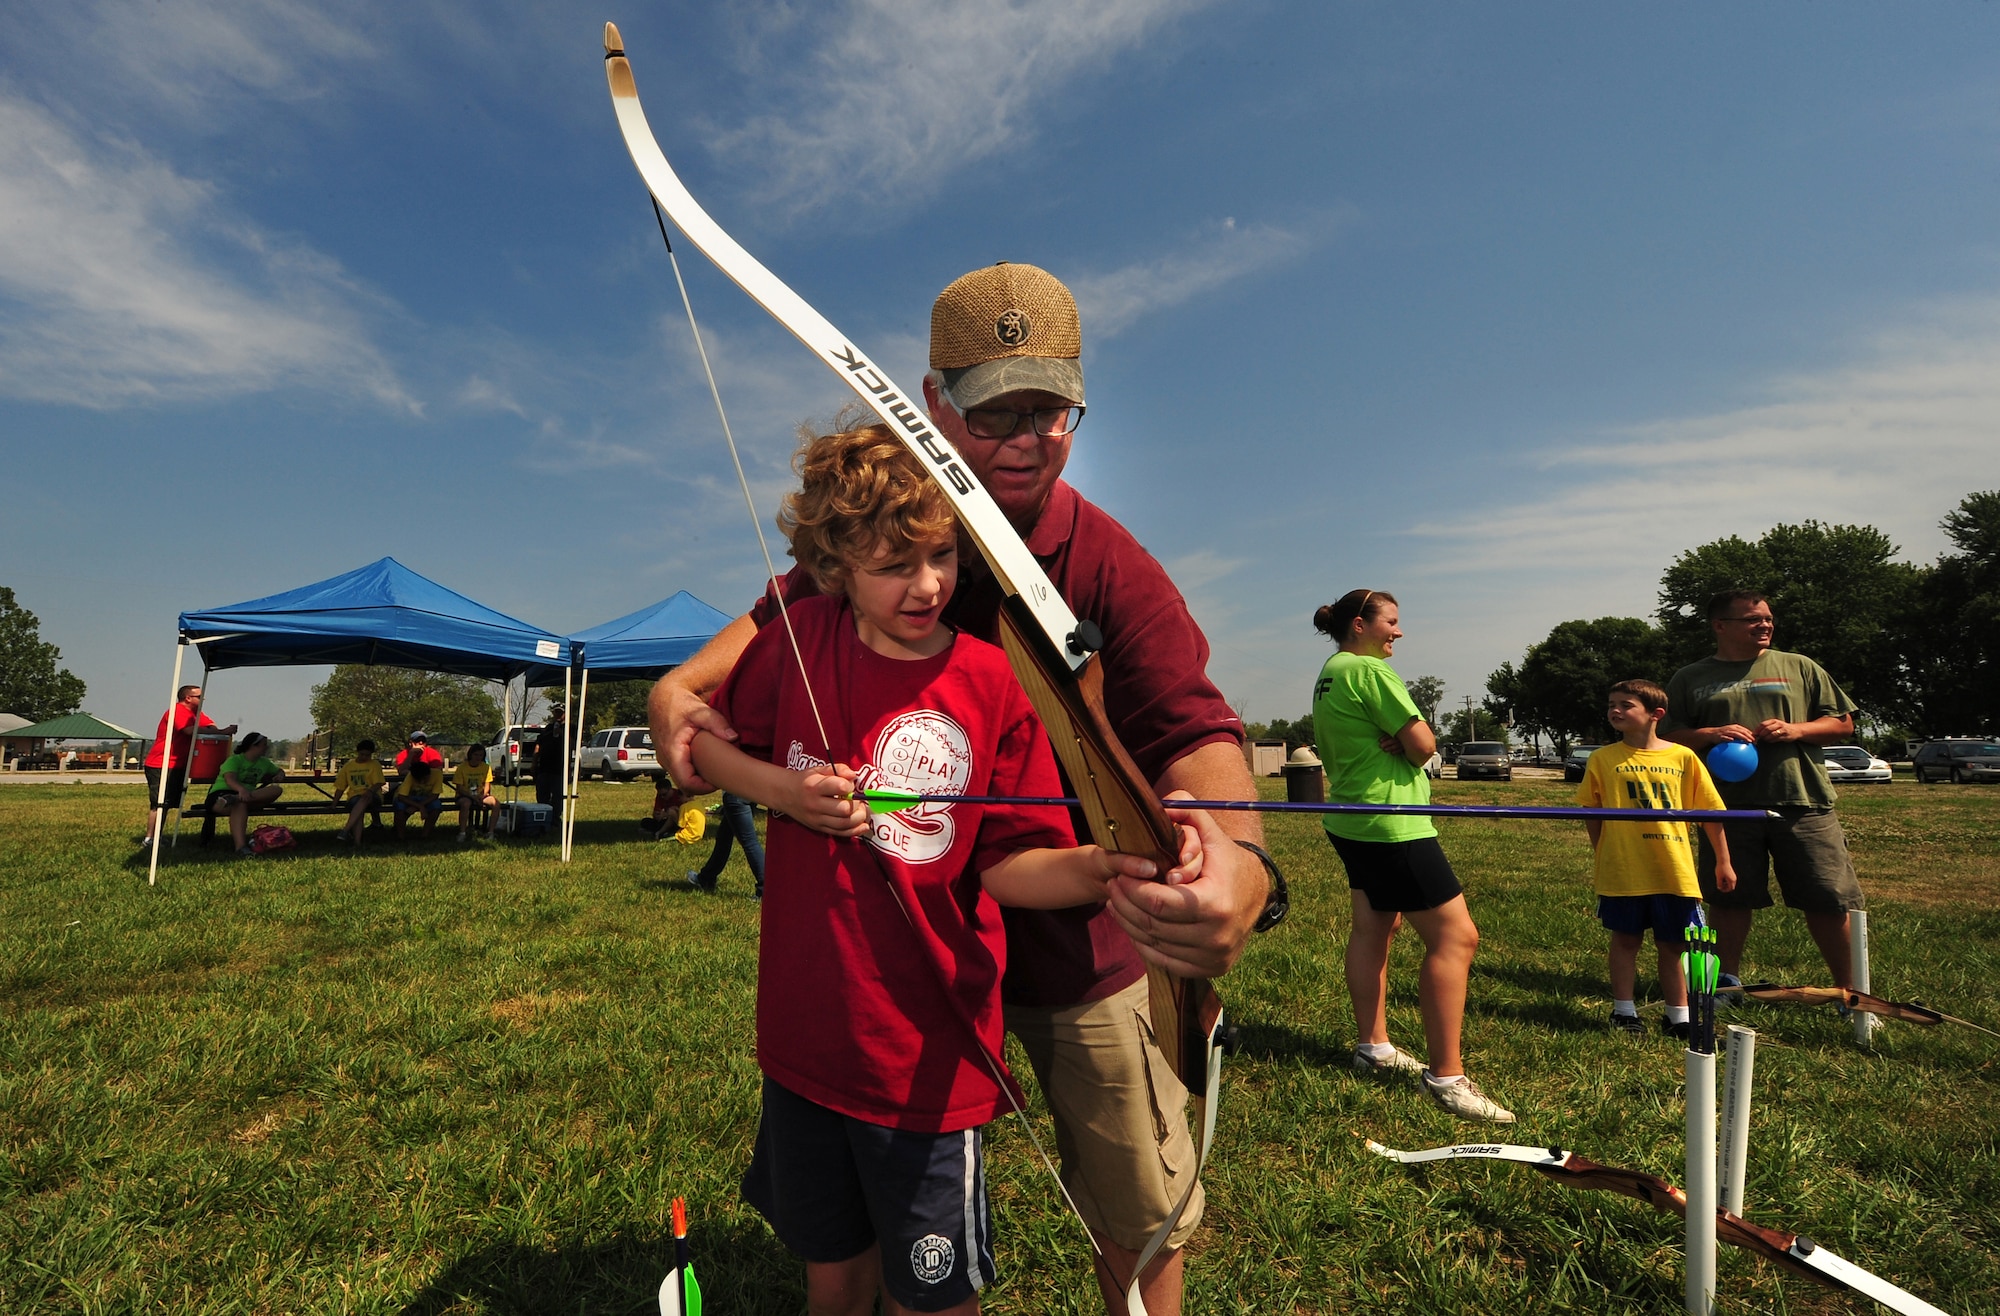 Eight year-old Mathew Baxter loads an arrow into a bow with the assistance of Team Offutt volunteer Sam Hines while attending the Exceptional Family Members Program’s Camp Offutt July 12 at Offutt AFB, Neb.  The two-day camp hosted by the Exceptional Family Member Program enhances teamwork abilities and builds friendships.  (U.S. Air Force photo by Josh Plueger/Released))